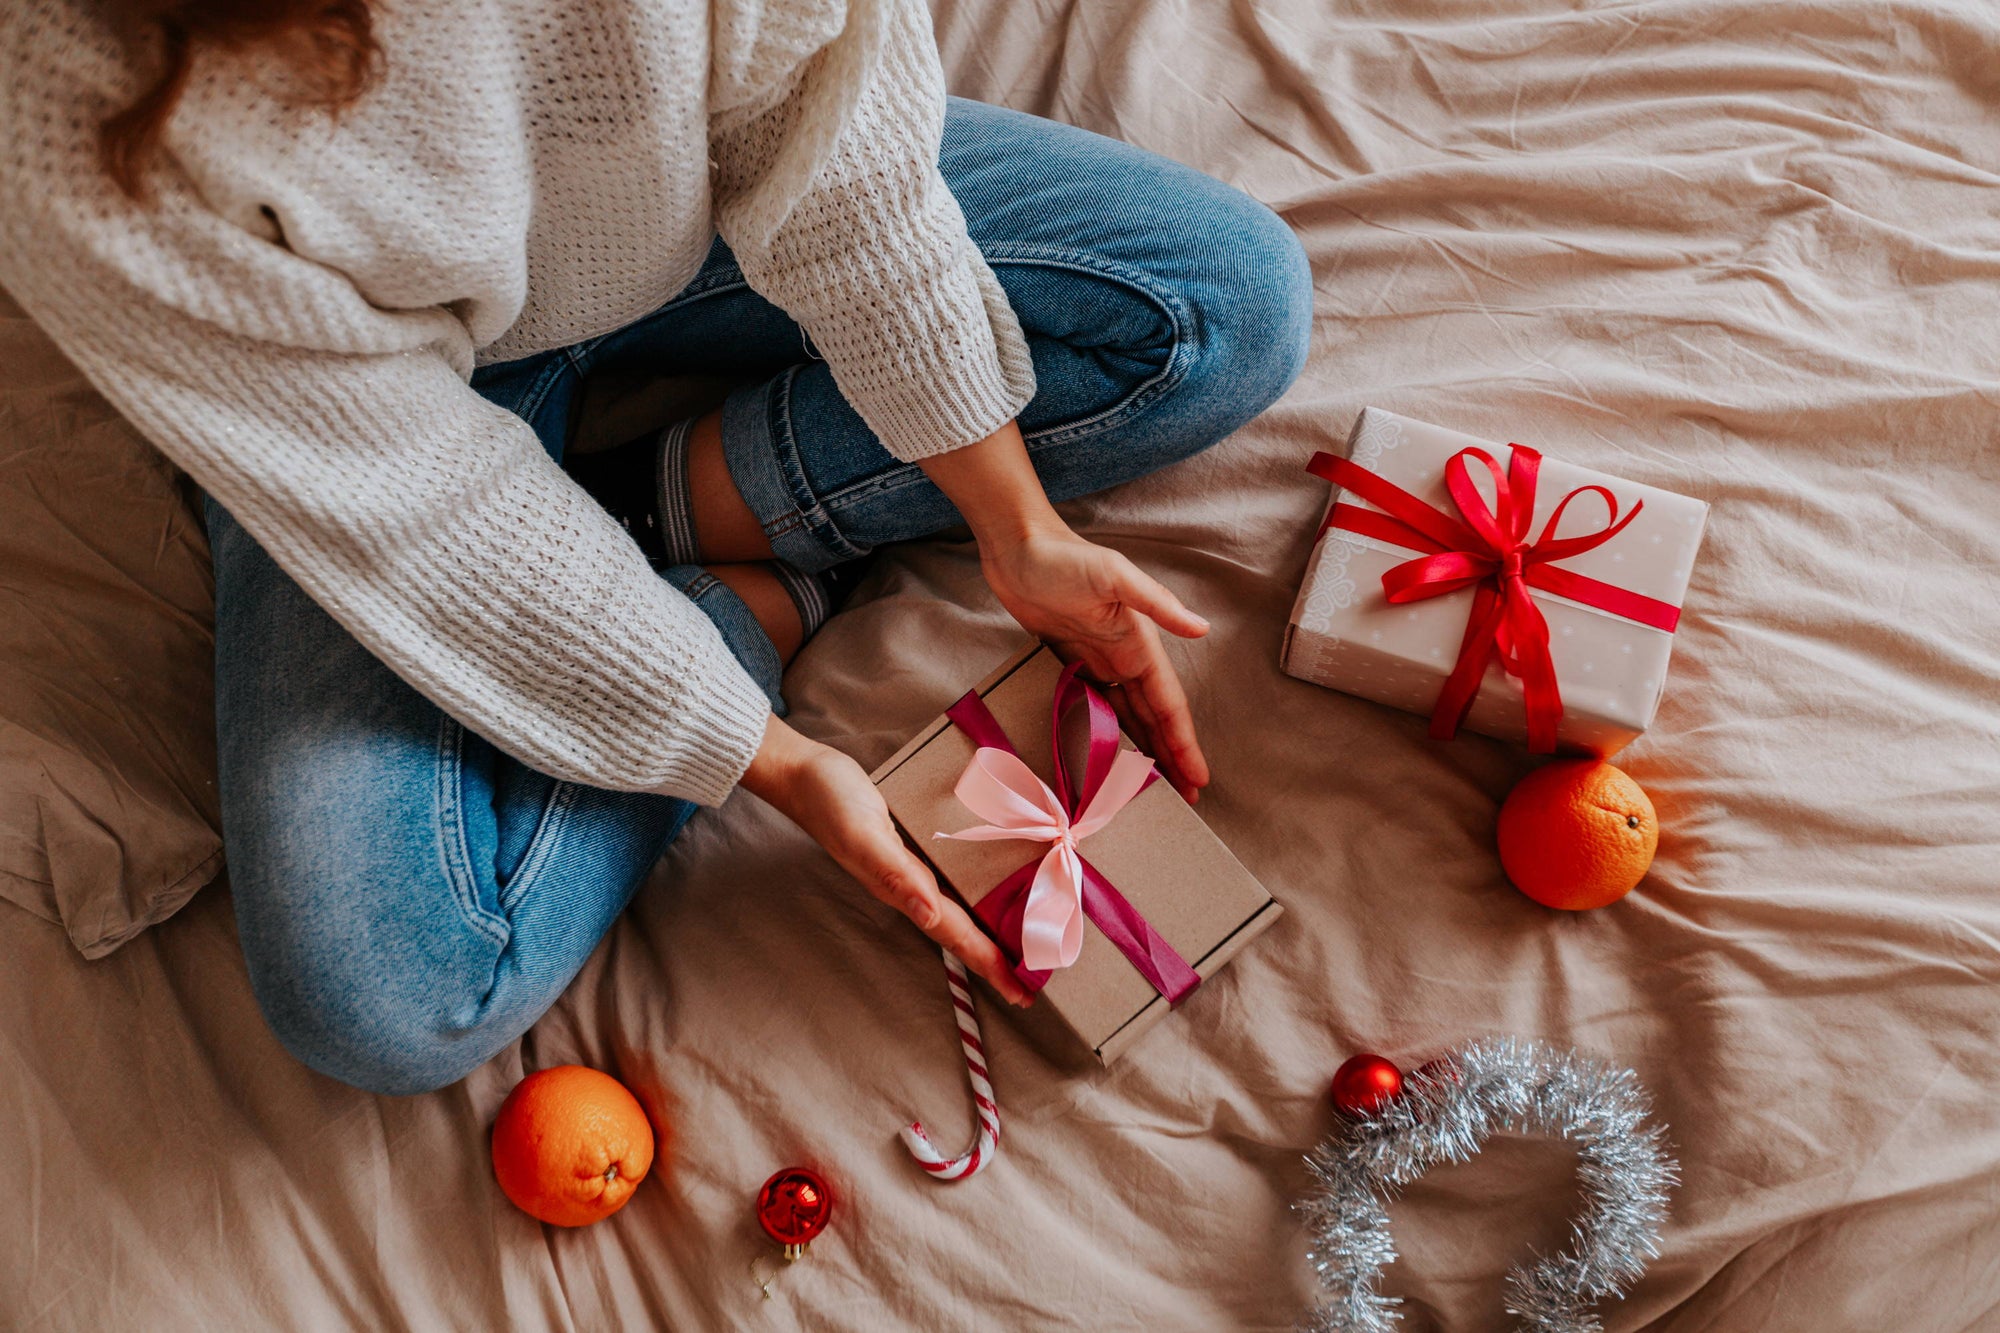 Part 1: 5 Self-Care Gift Ideas in 5 Minutes